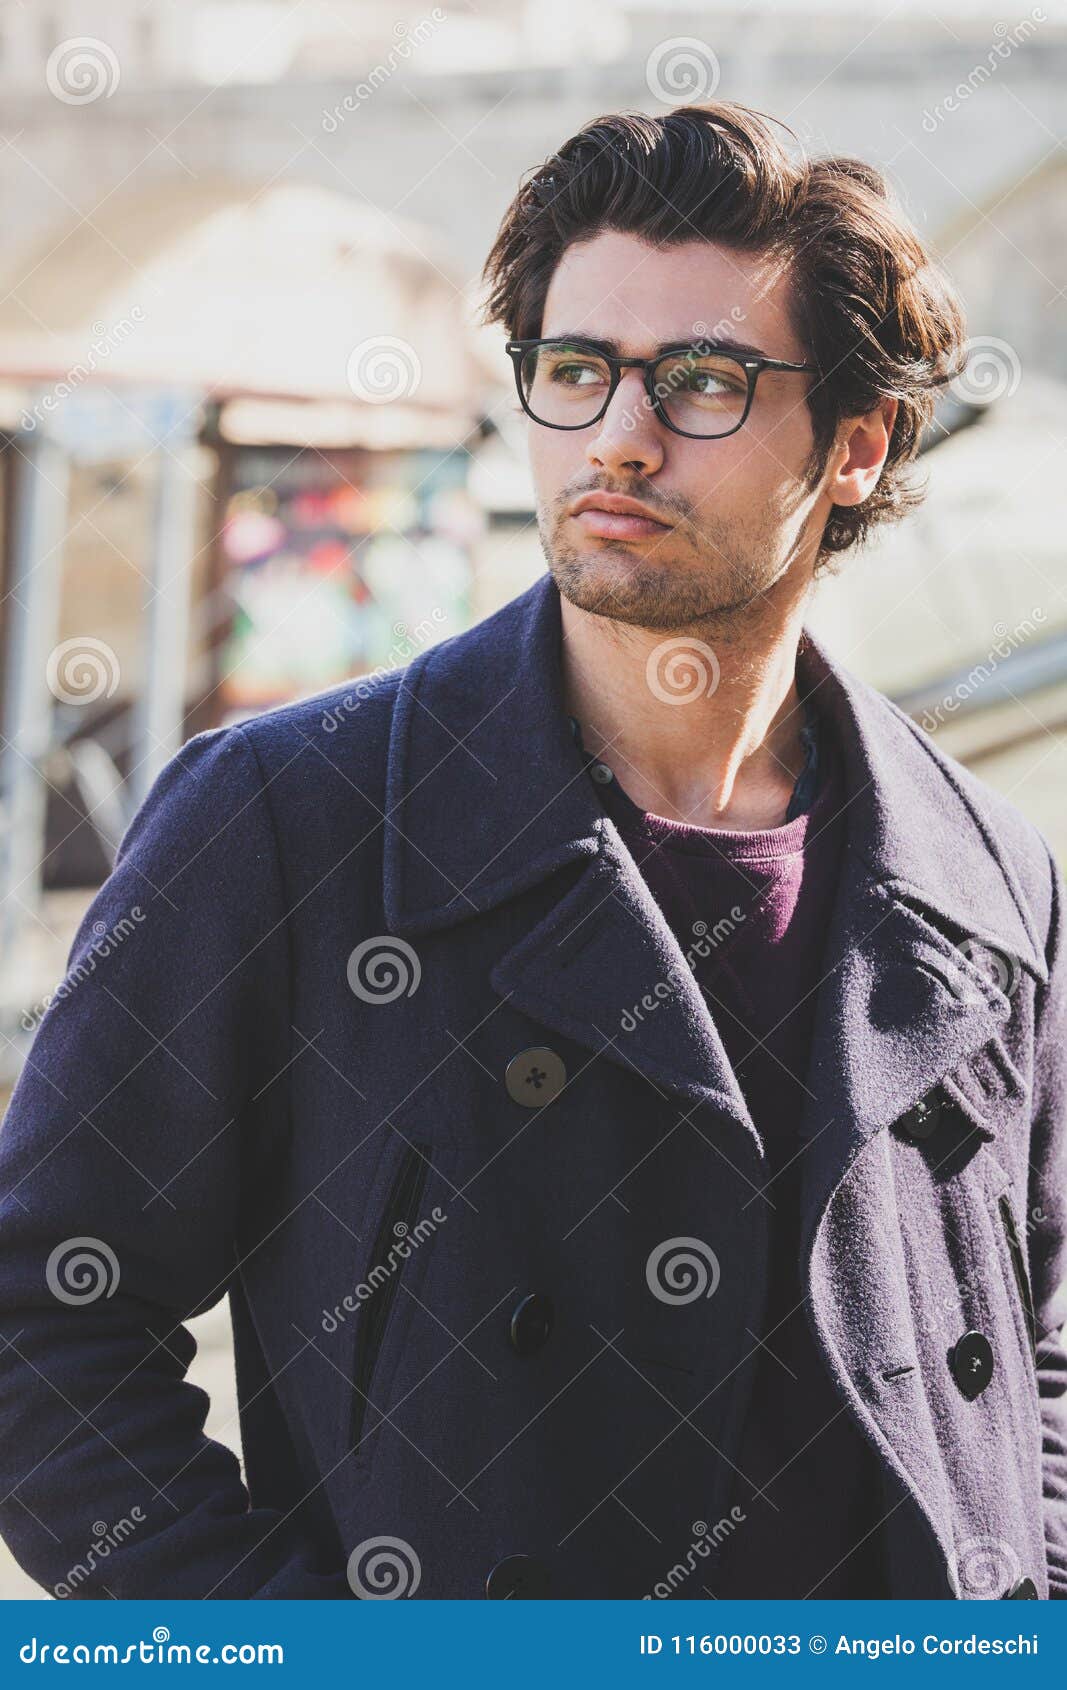 Handsome Portrait Man with Glasses Outdoor. Model Hair and Clothing Style.  Stock Image - Image of expression, good: 116000033